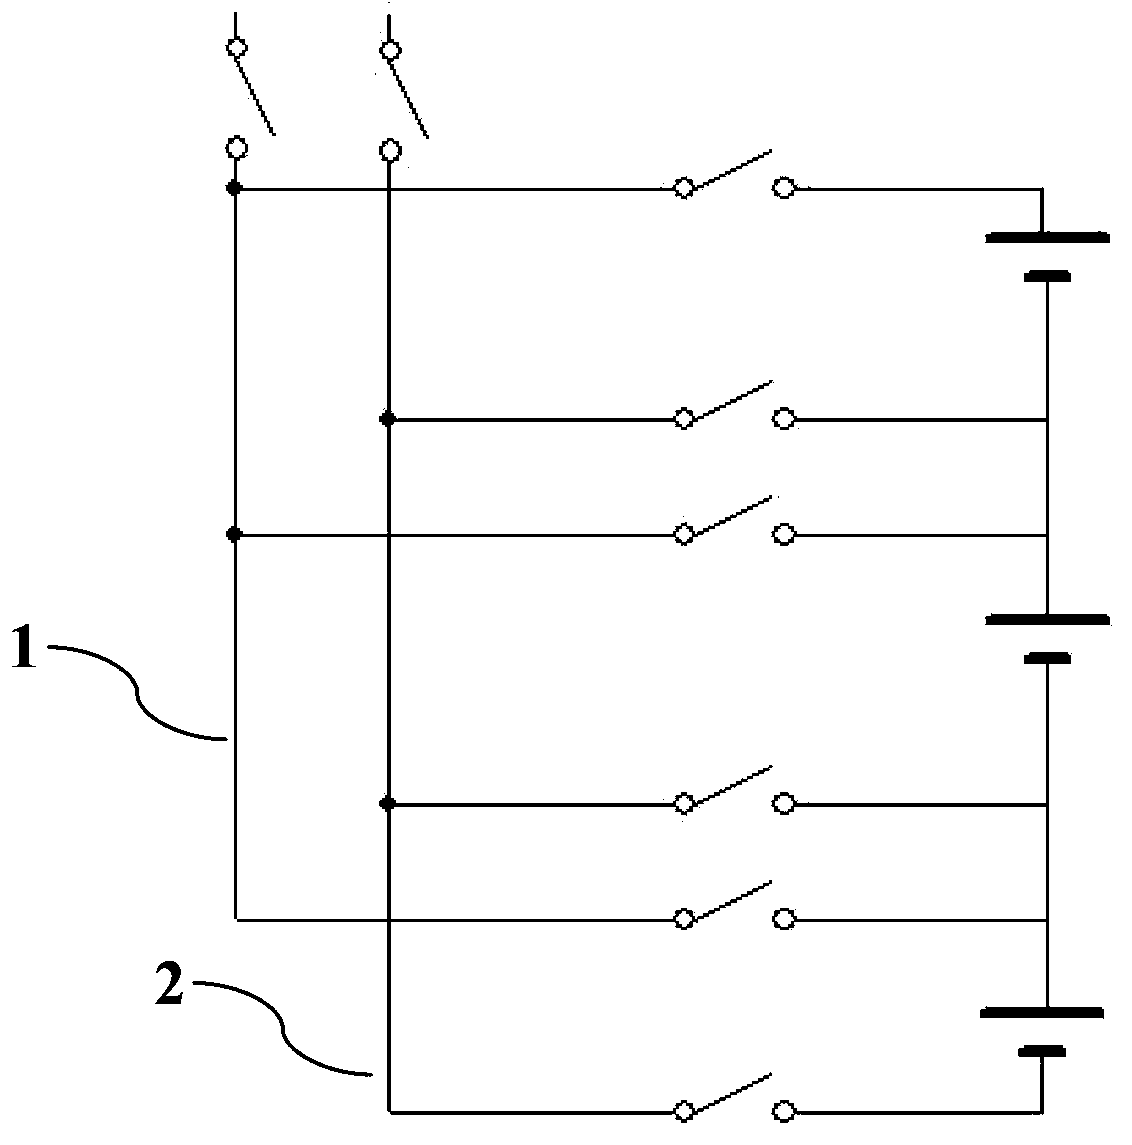 Charging detection system of battery pack